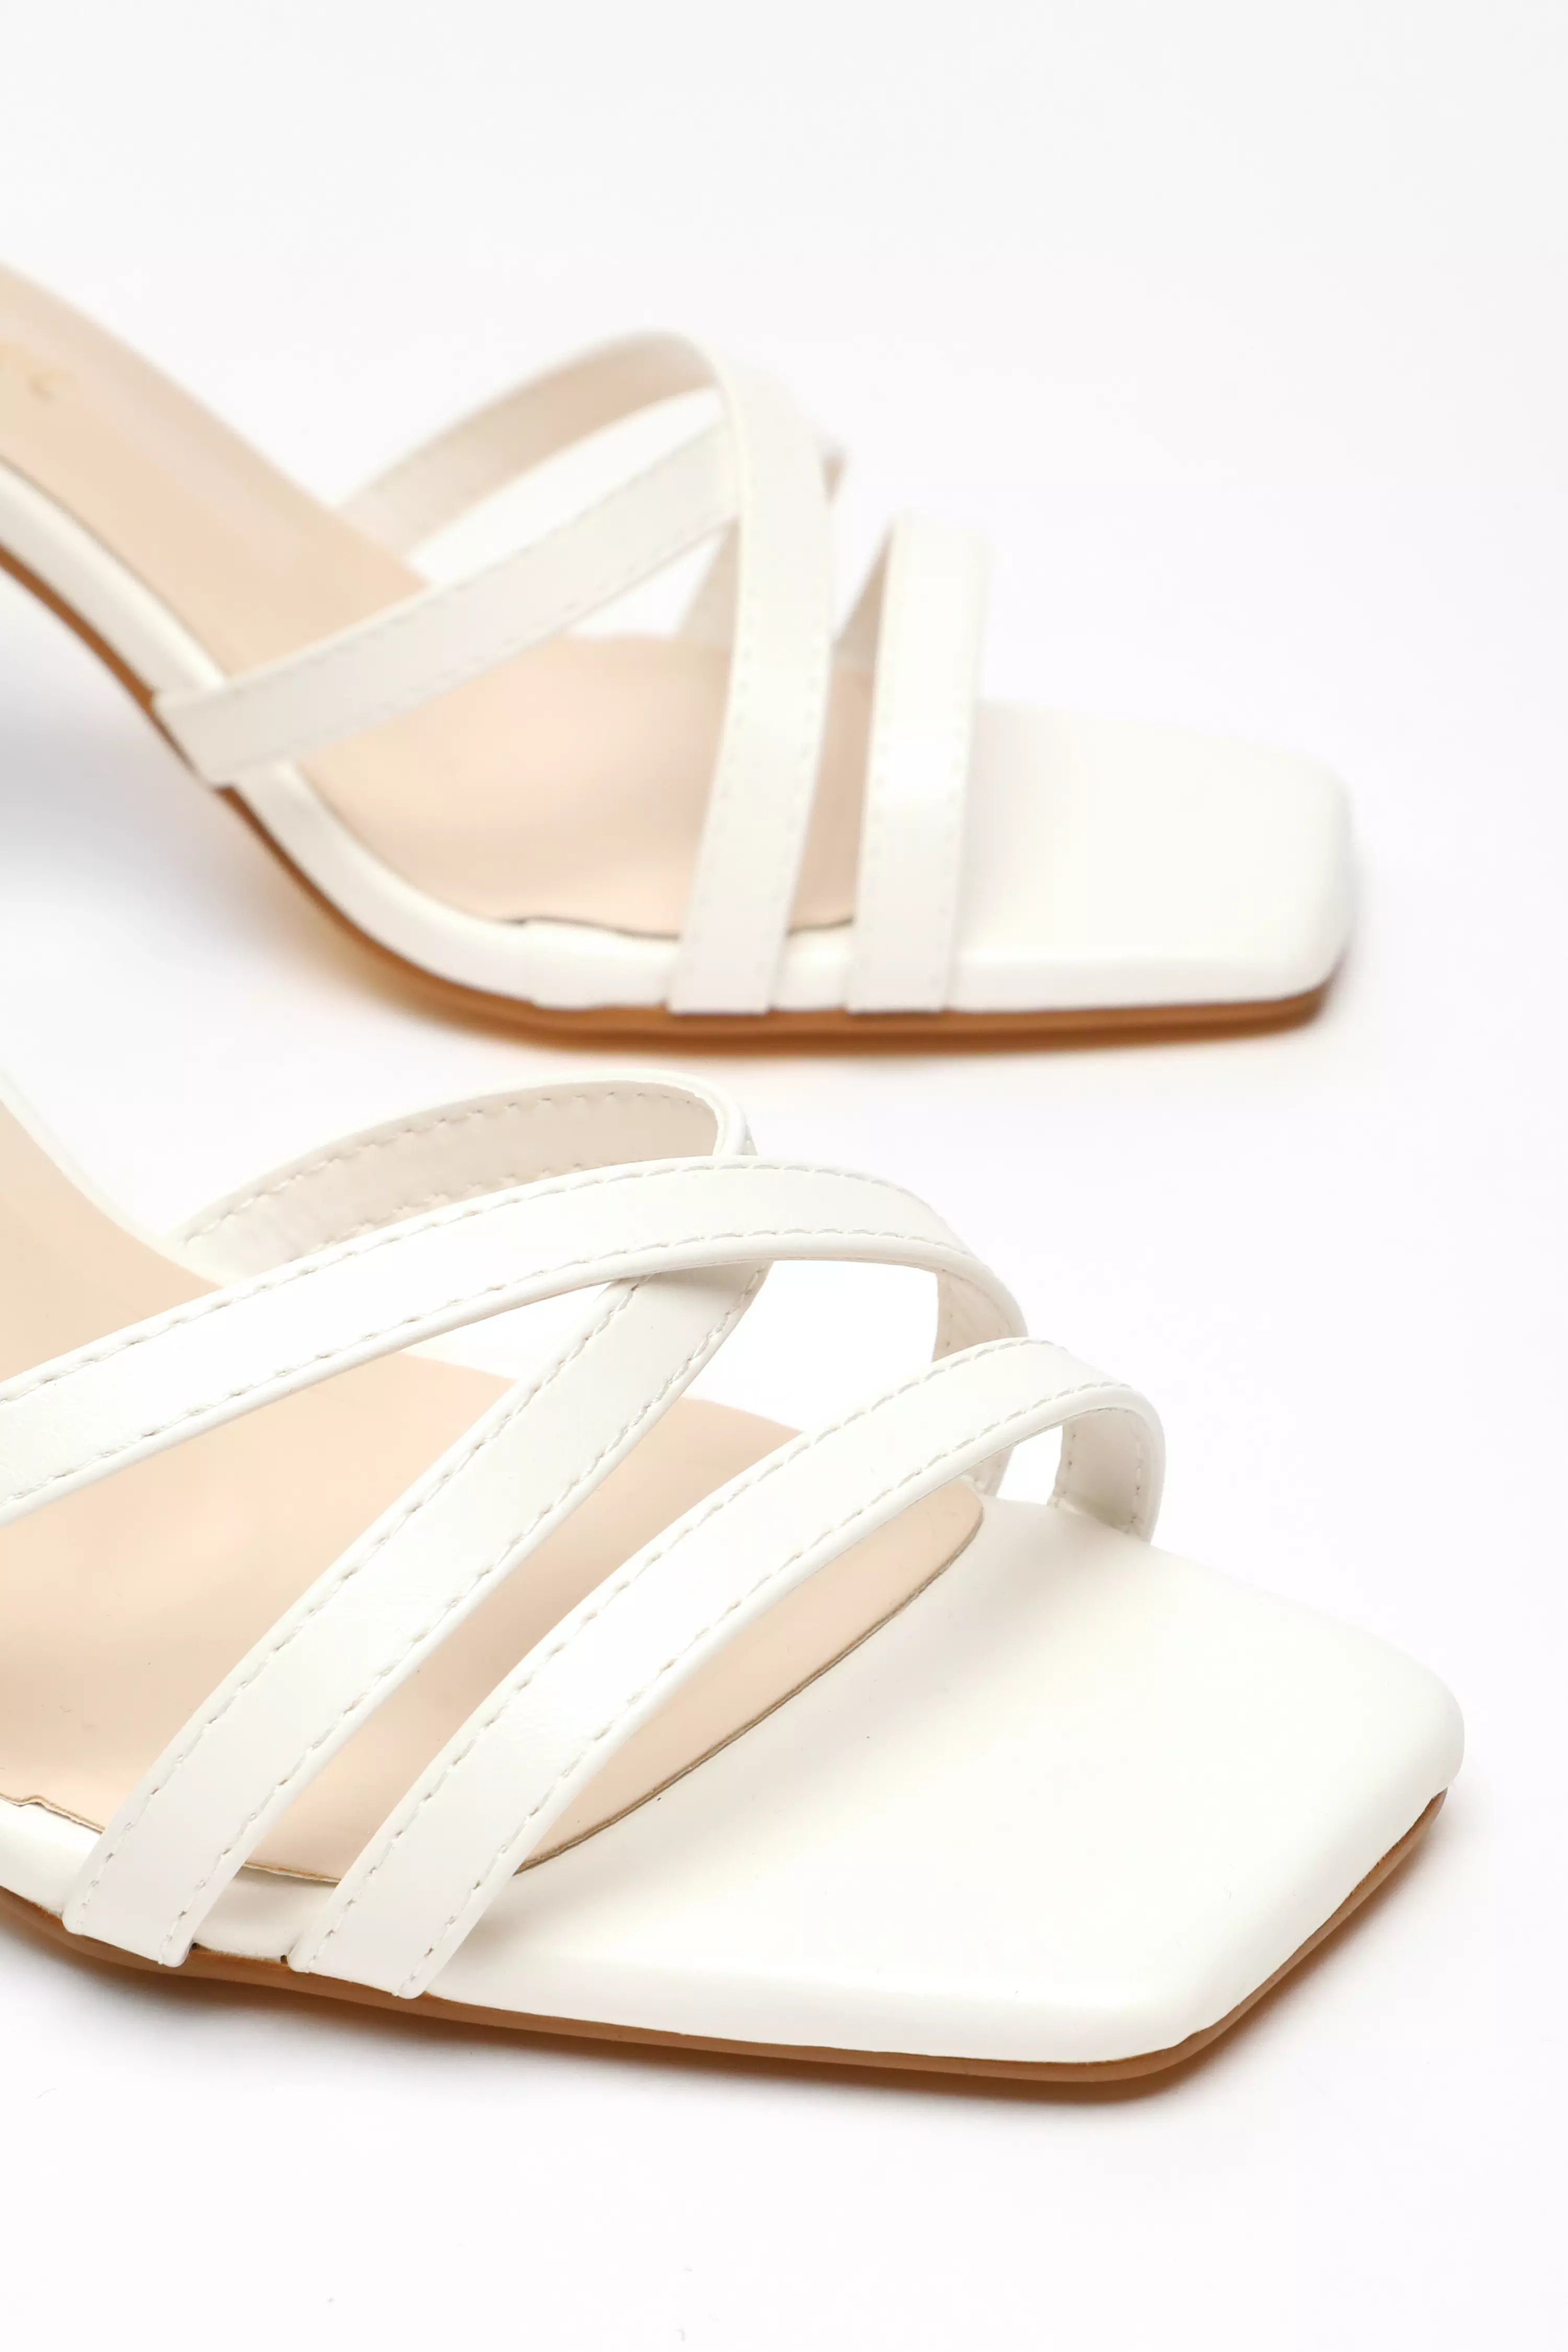 Wide Fit White Faux Leather Strappy Heeled Sandals